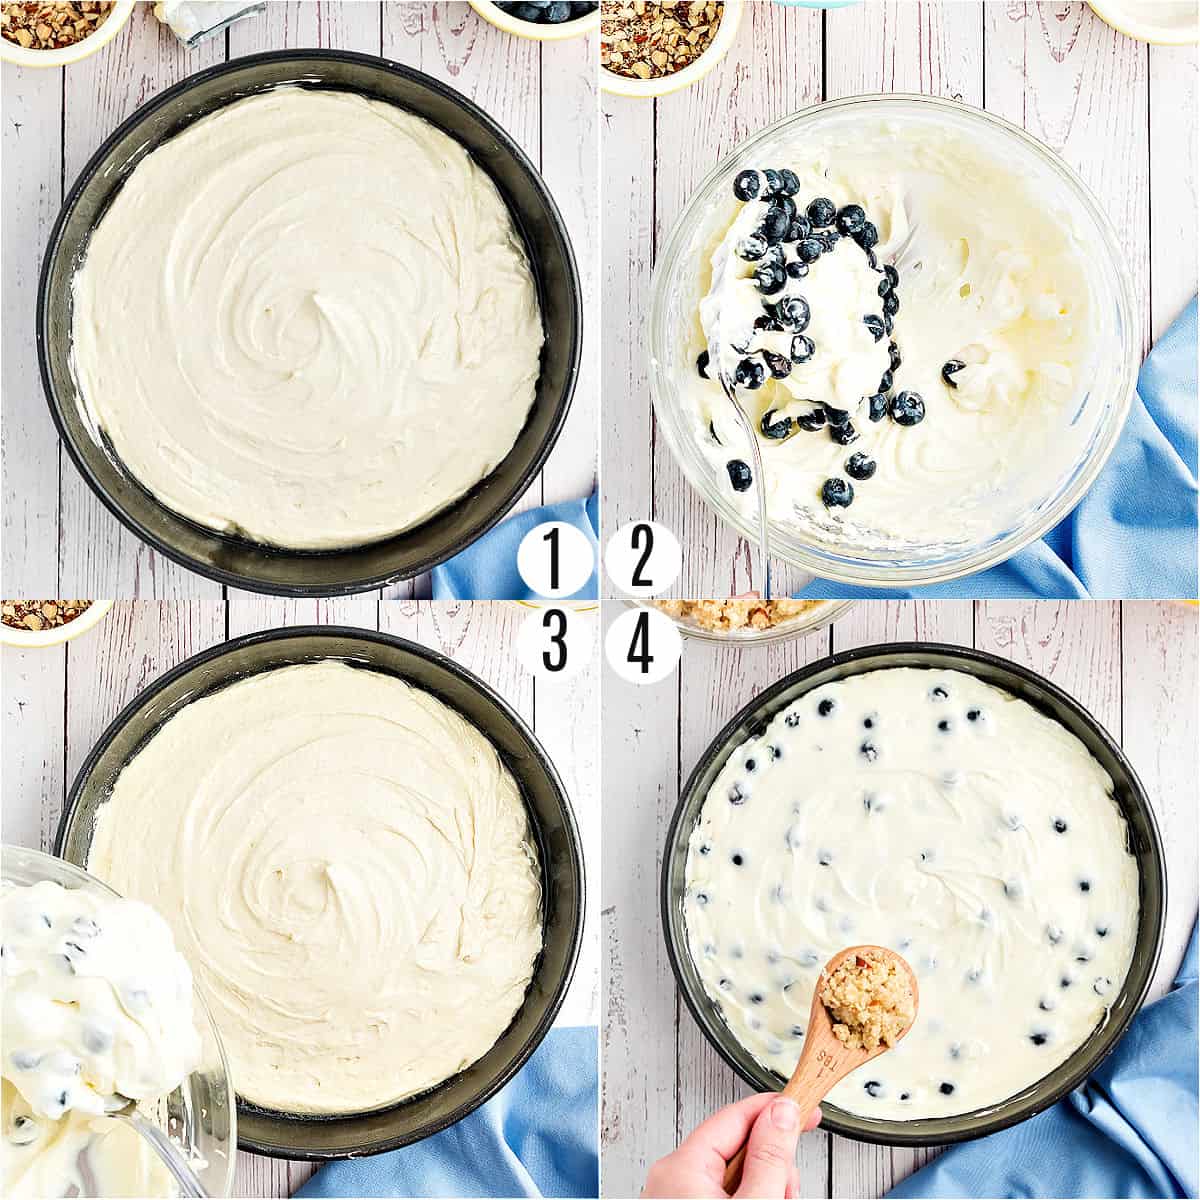 Step by step photos showing how to make blueberry cream cheese coffee cake.